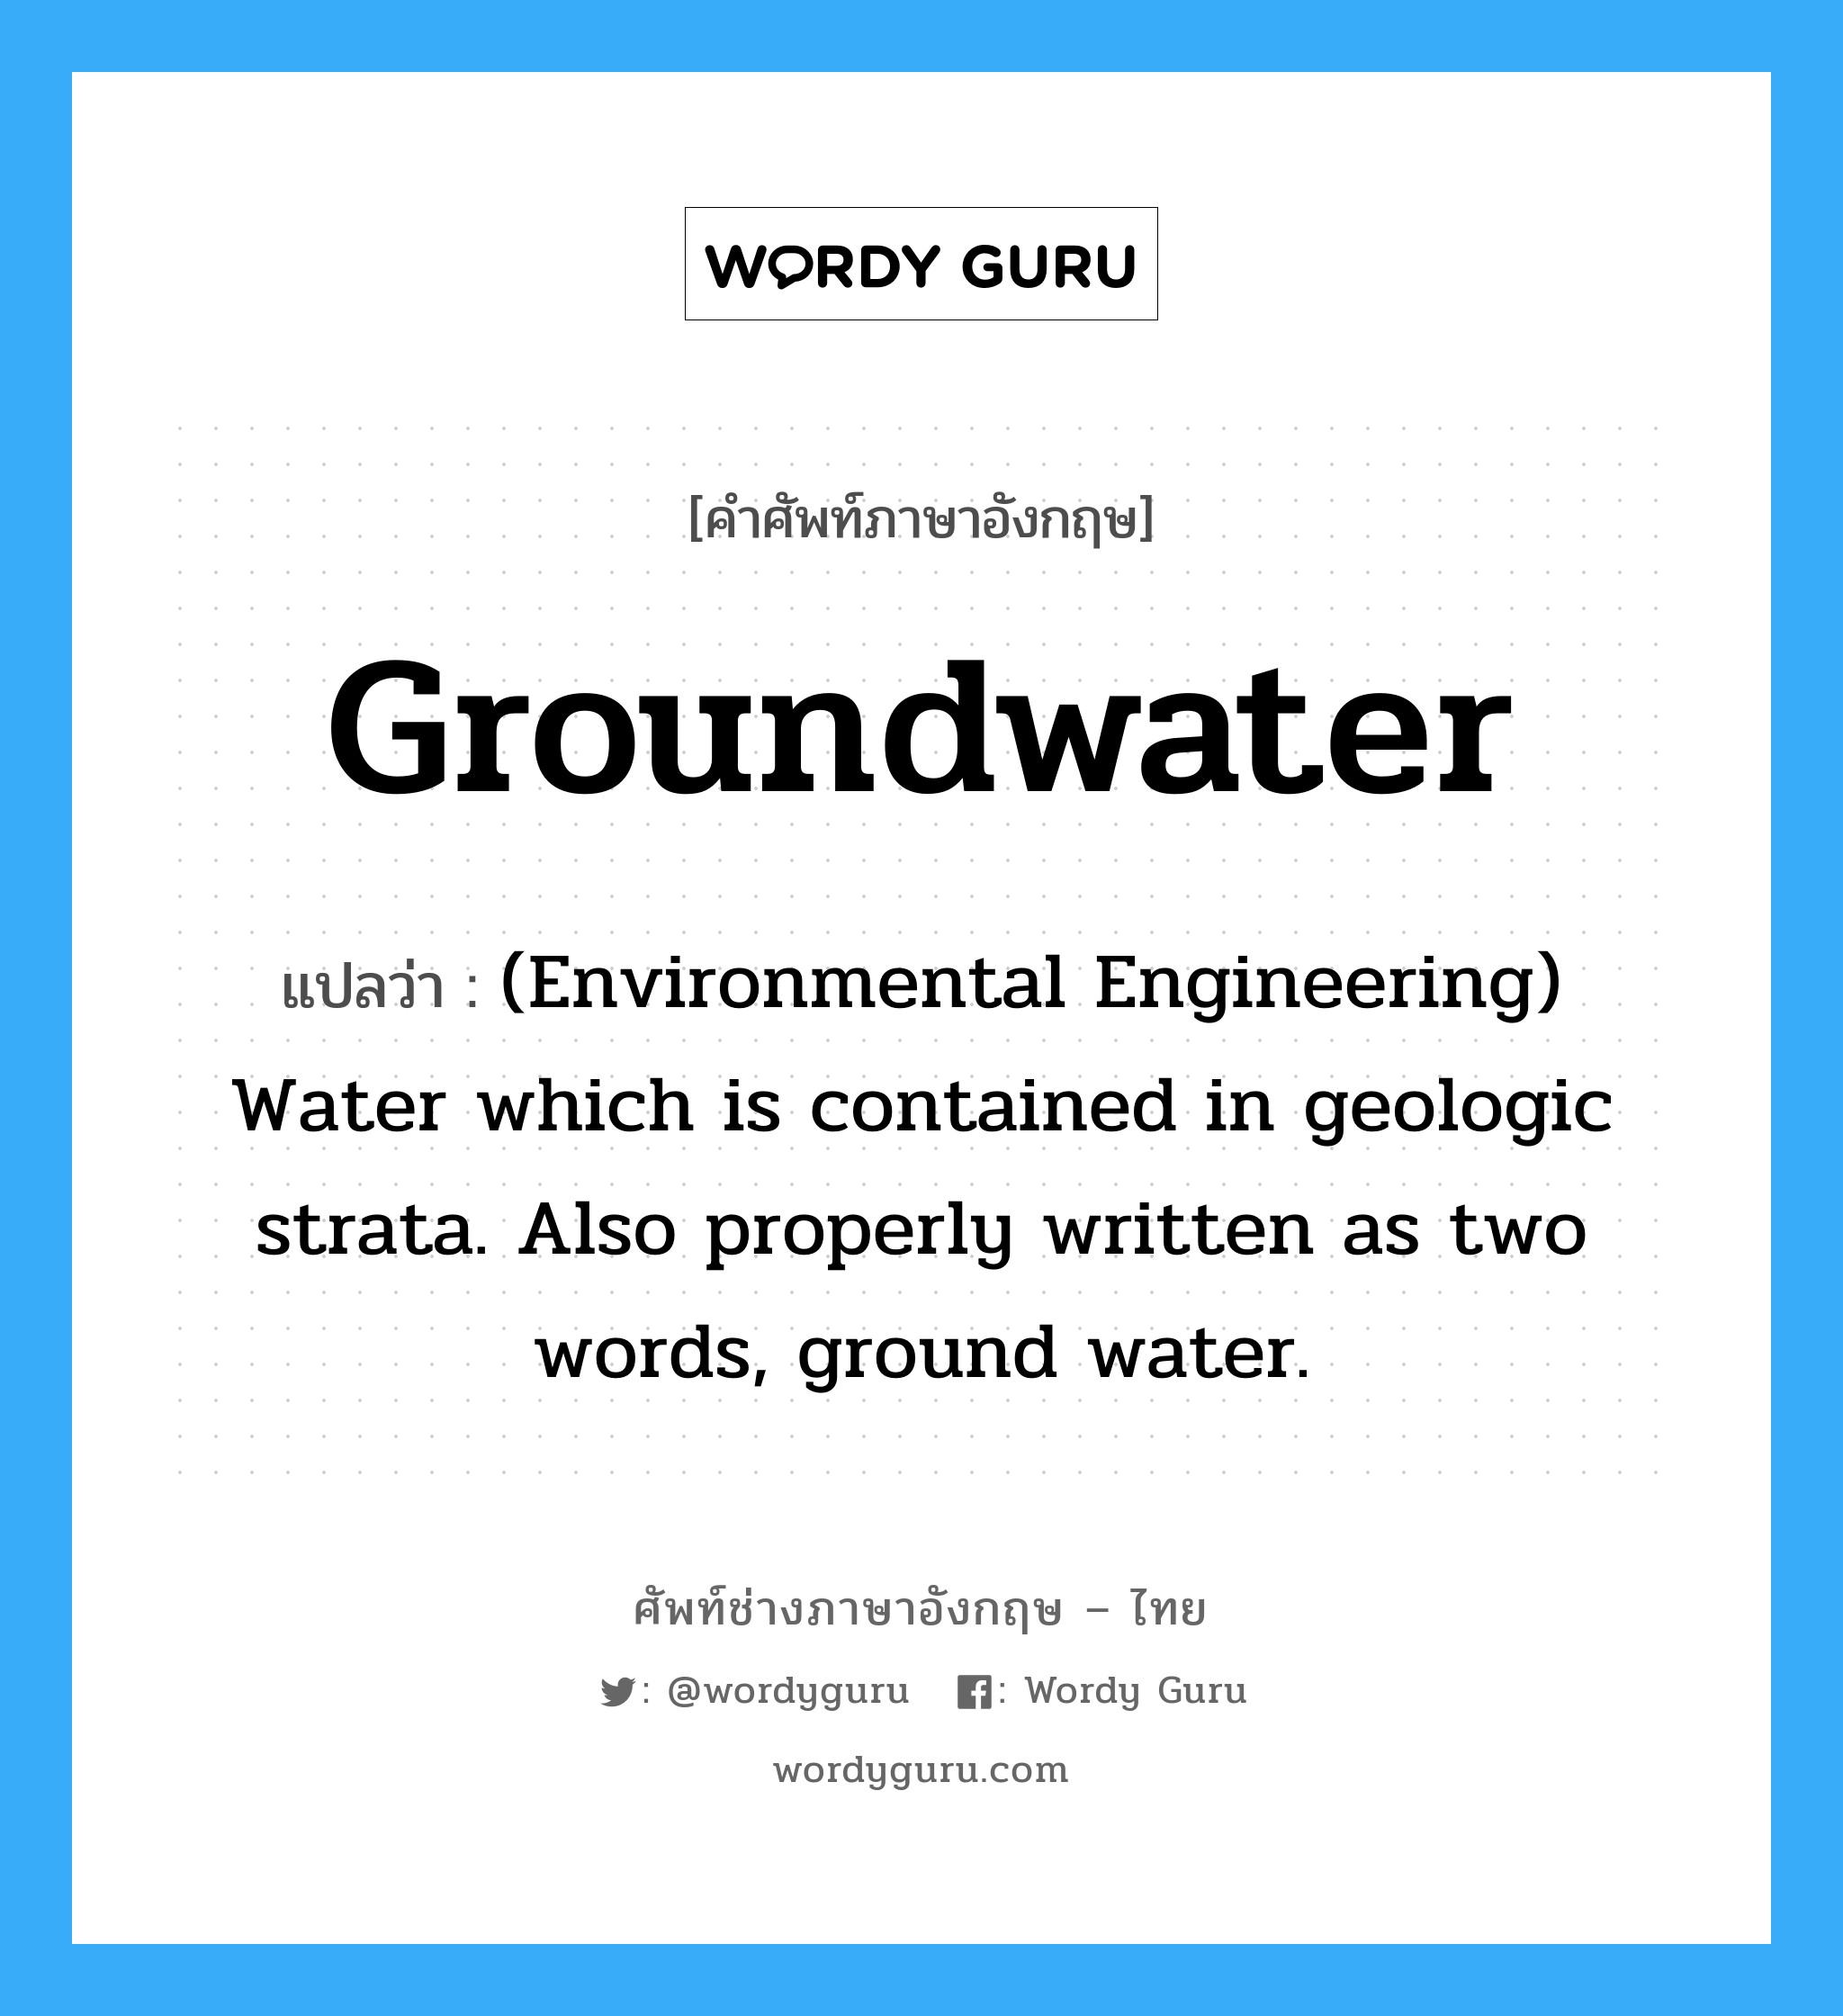 Groundwater แปลว่า?, คำศัพท์ช่างภาษาอังกฤษ - ไทย Groundwater คำศัพท์ภาษาอังกฤษ Groundwater แปลว่า (Environmental Engineering) Water which is contained in geologic strata. Also properly written as two words, ground water.